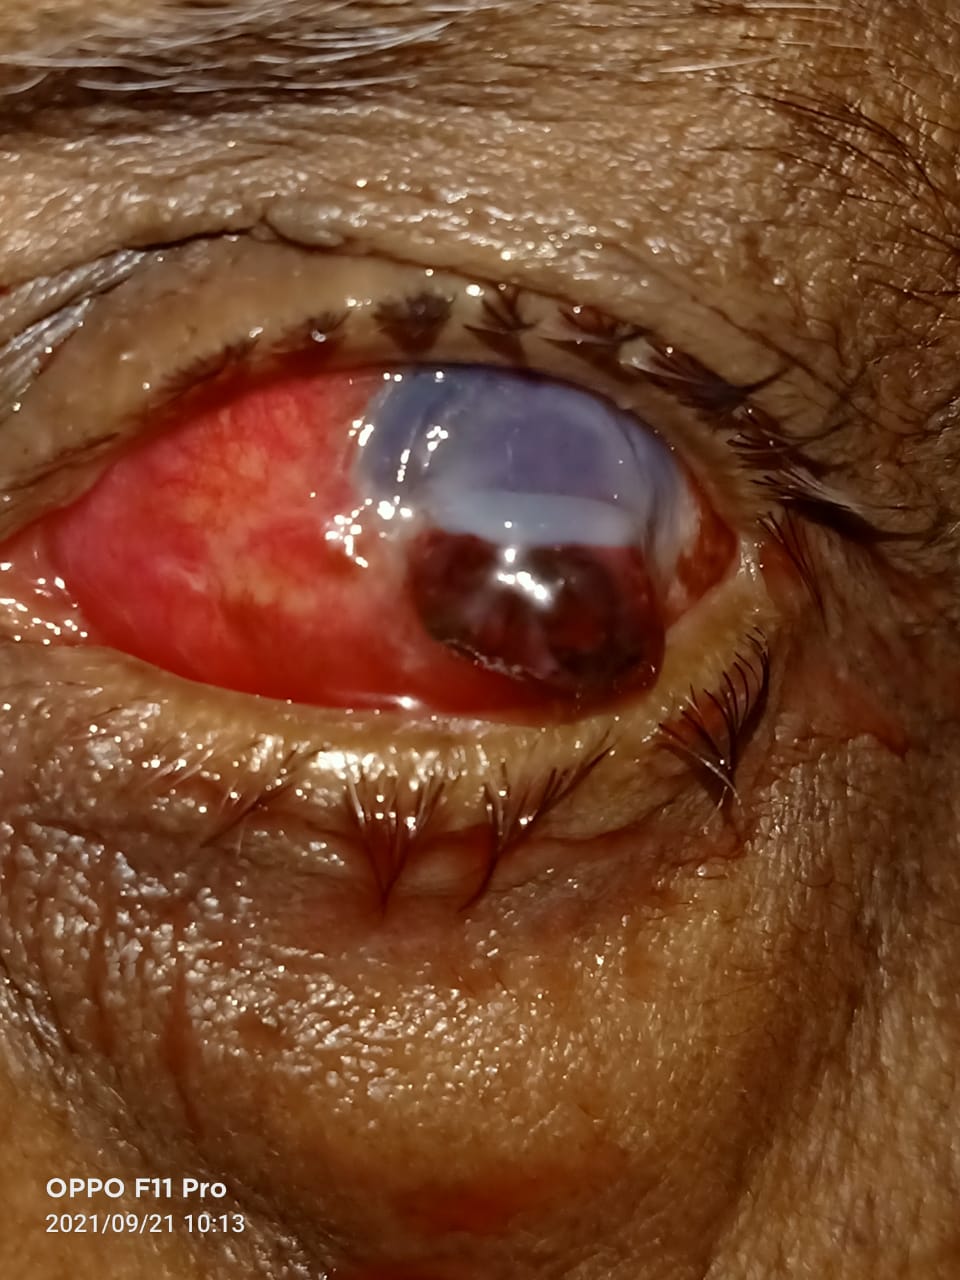 Digital image of the patient depicting inferior limbal laceration with prolapse of uveal tissue post iron nail injury